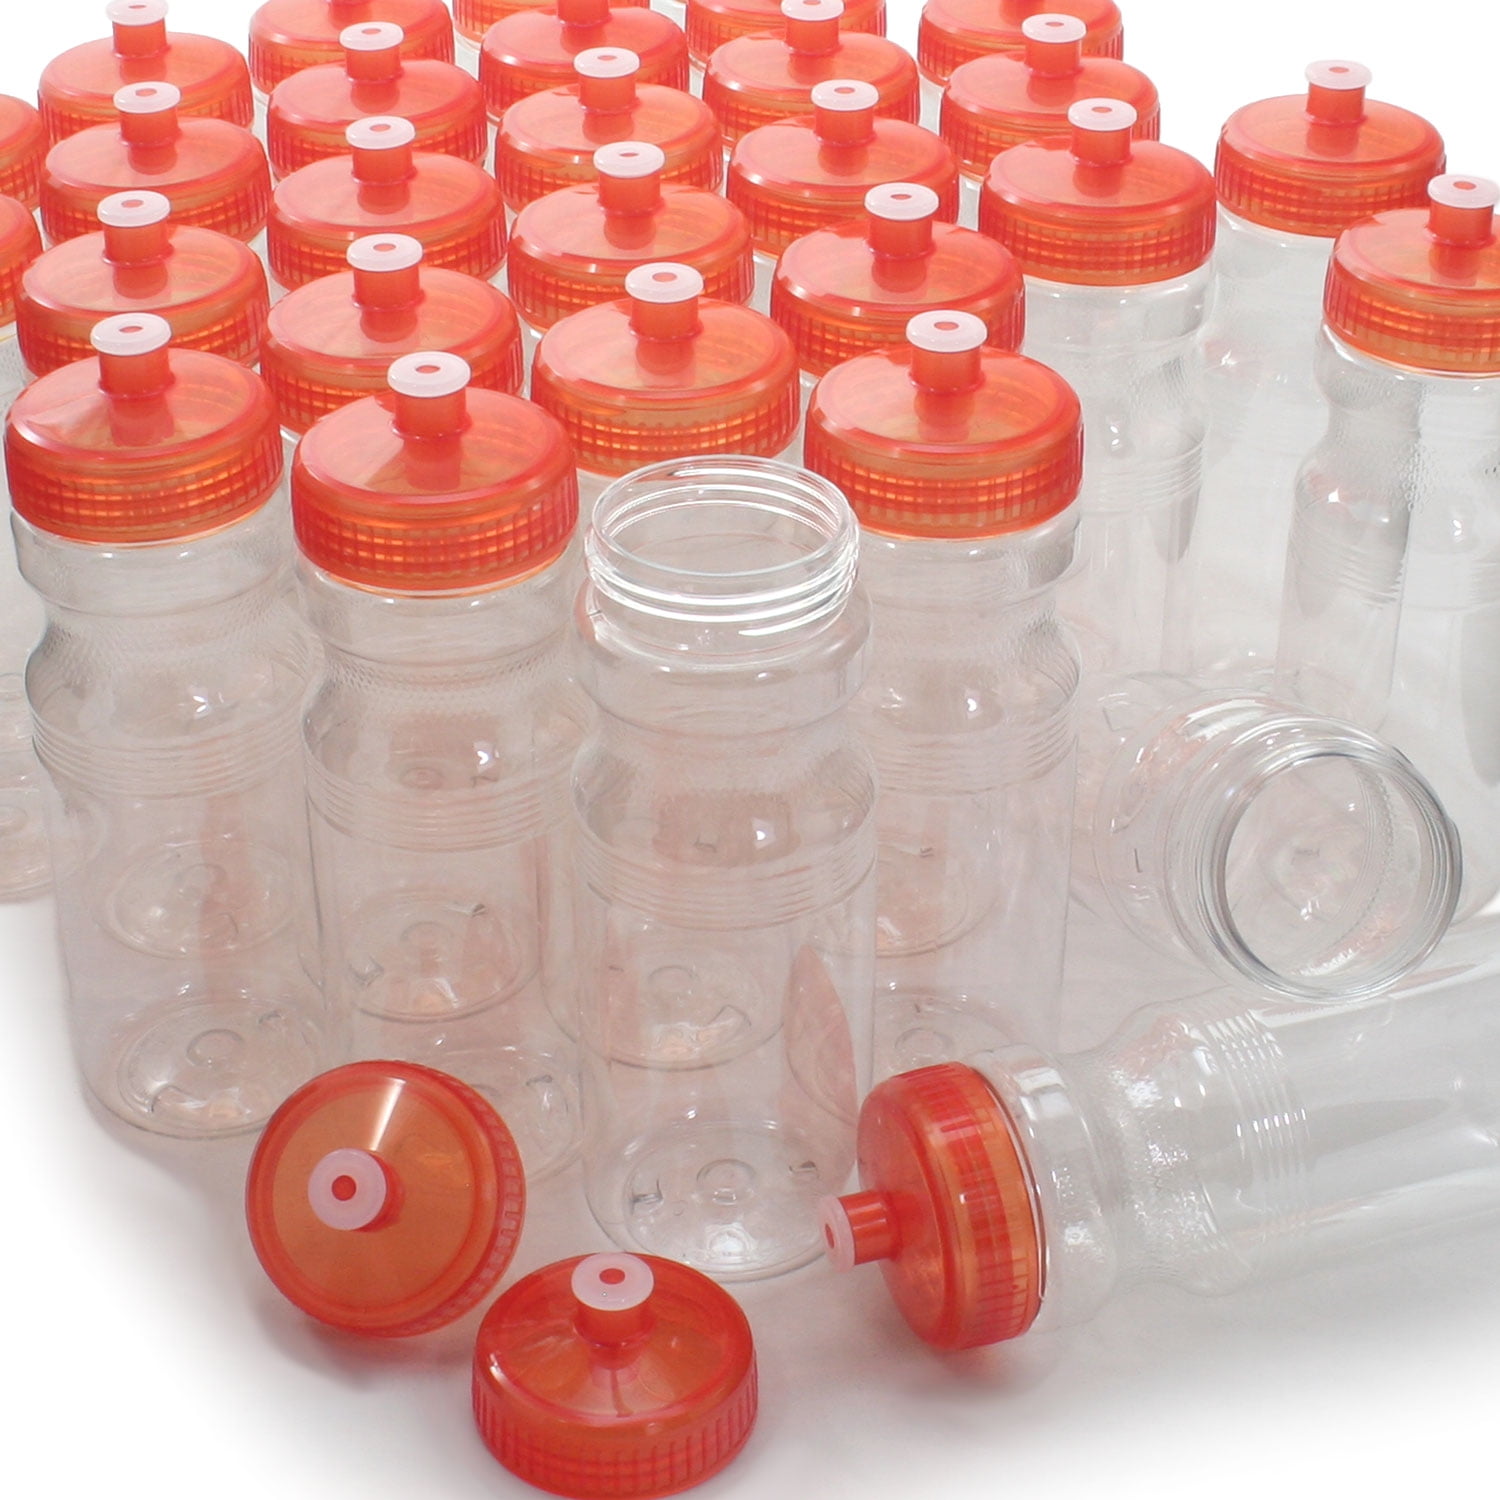 Kryc-- 4 Pack - 32oz Squeeze Water Bottles Bulk Set, Bpa Free, For Sports,  Cycling, Bike, Quick Squirt Hydration, Shaker Cup Wire Whisk Included.